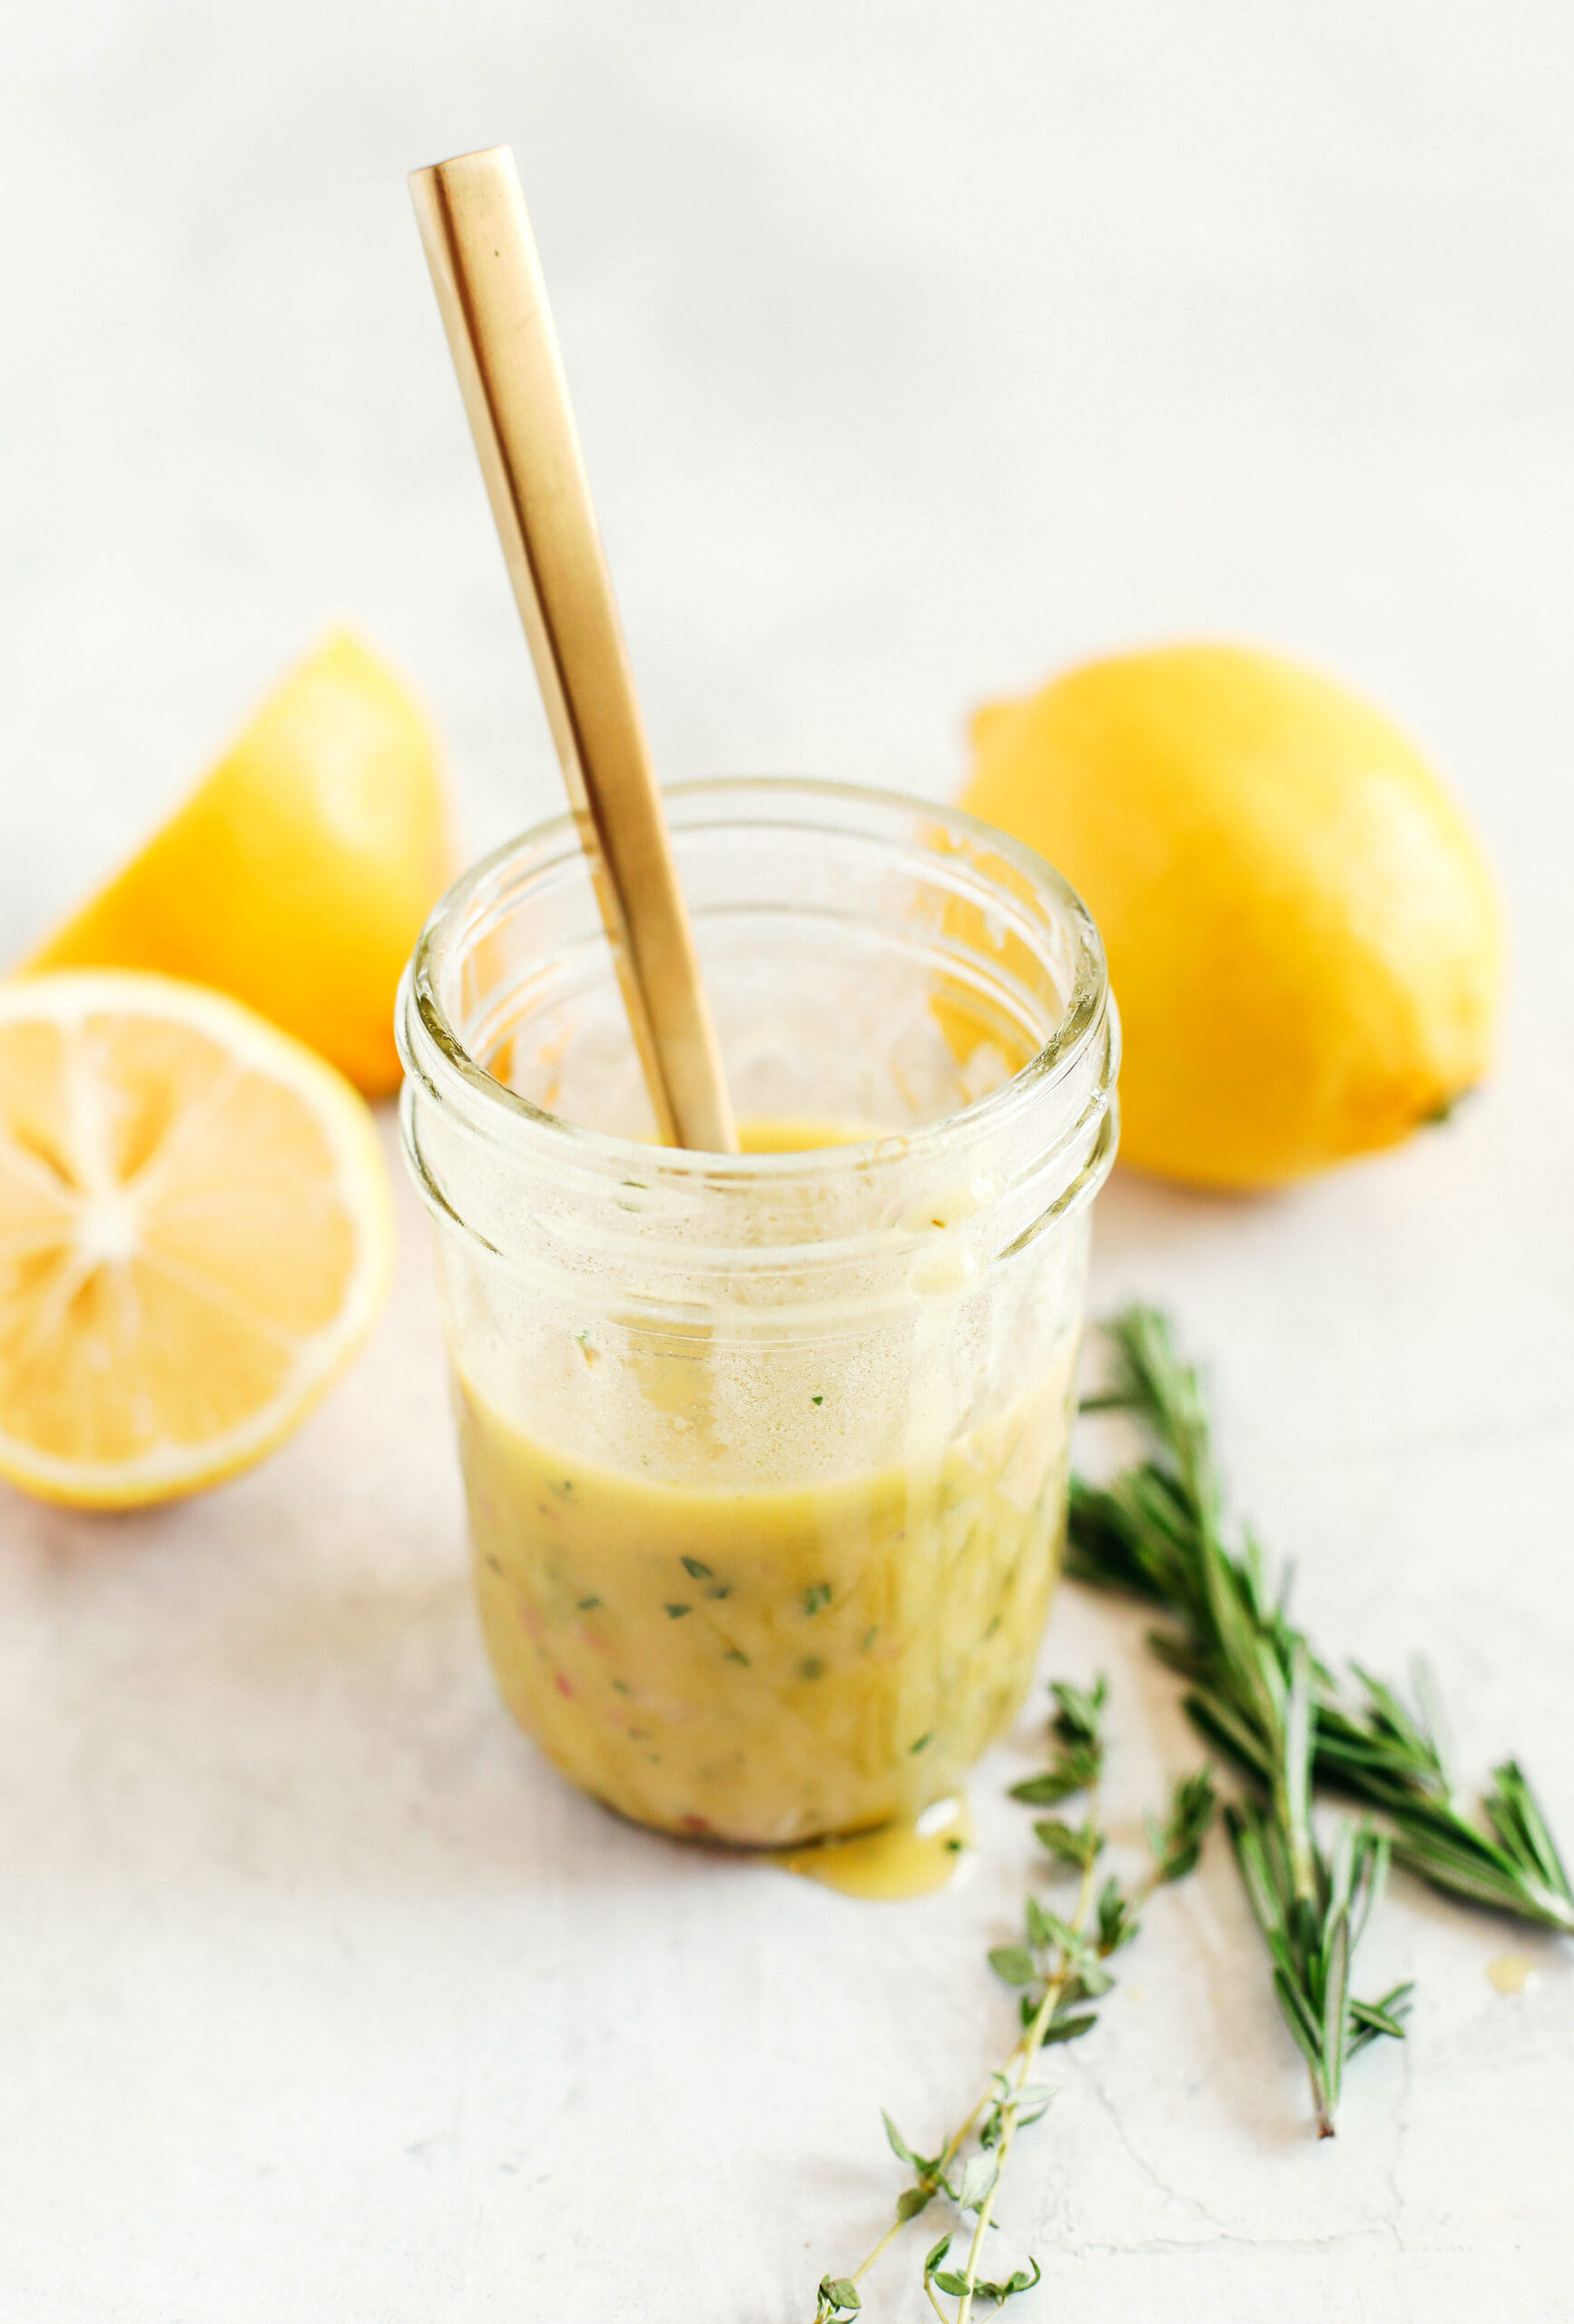 Bright and fresh Lemon Dijon Herb Dressing made in just minutes with a few simple pantry ingredients!  Perfect for salads, veggies, marinades, and more!